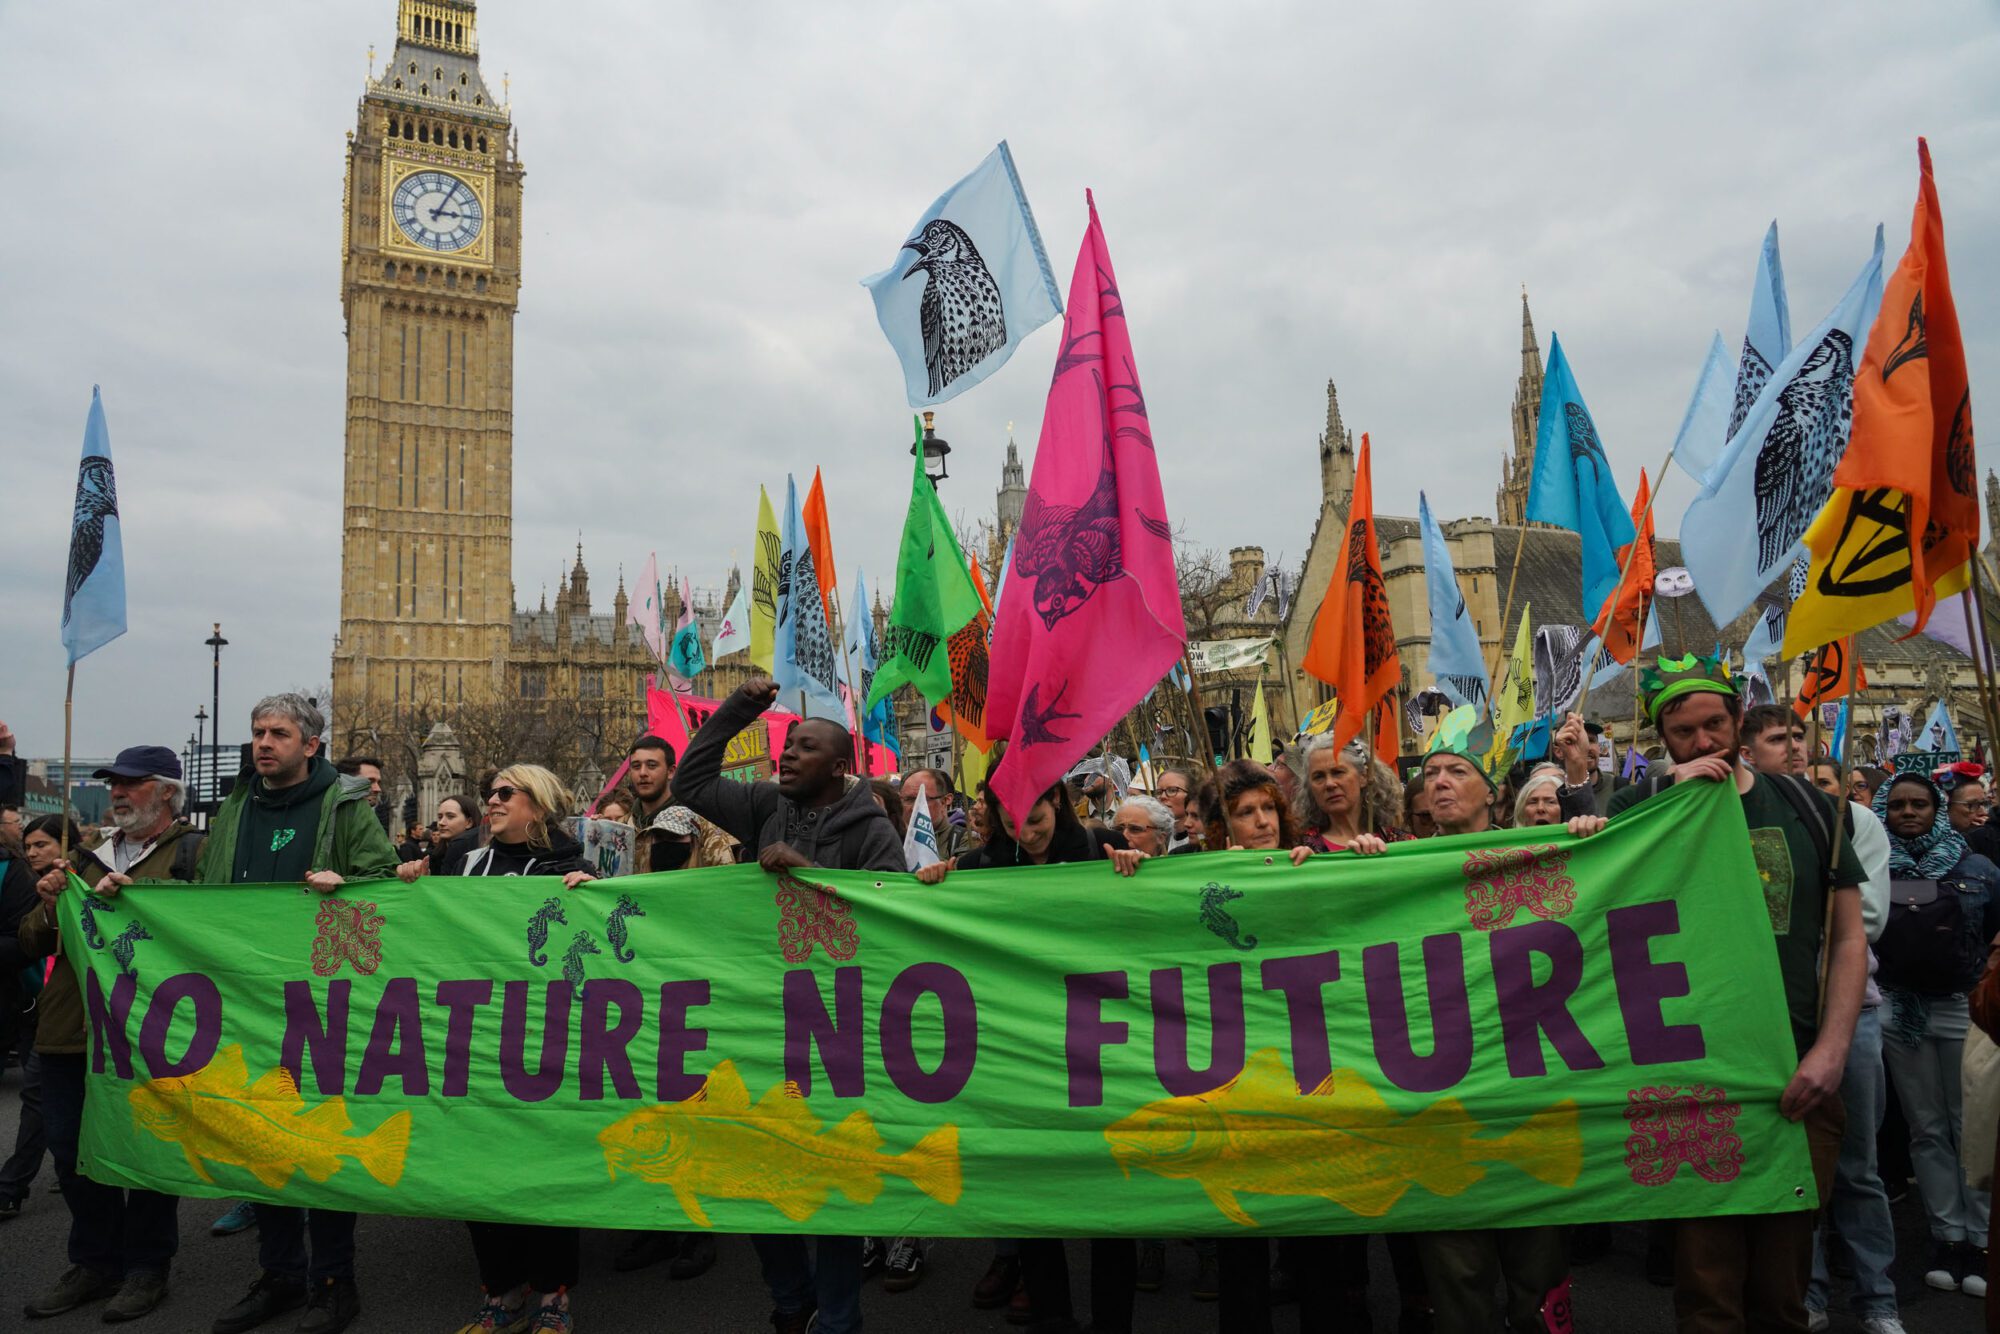 A scene in front of Big Ben with many in a crowd waving colourful flags. In front of the cloud is a huge green banner reading "No nature, no future"